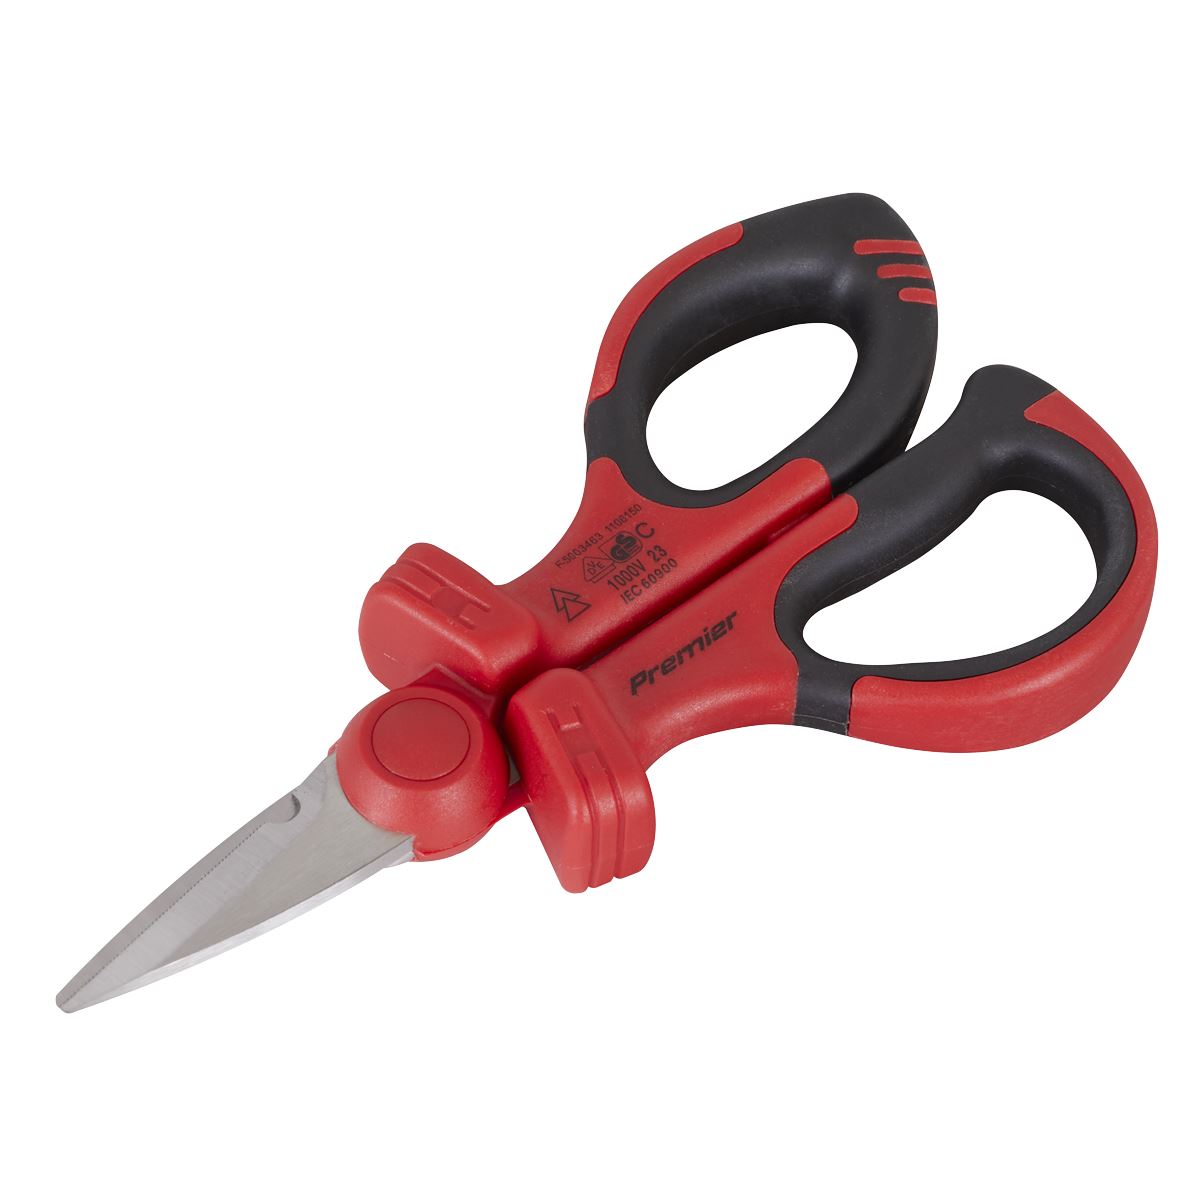 Sealey Premier Insulated Scissors - VDE Approved